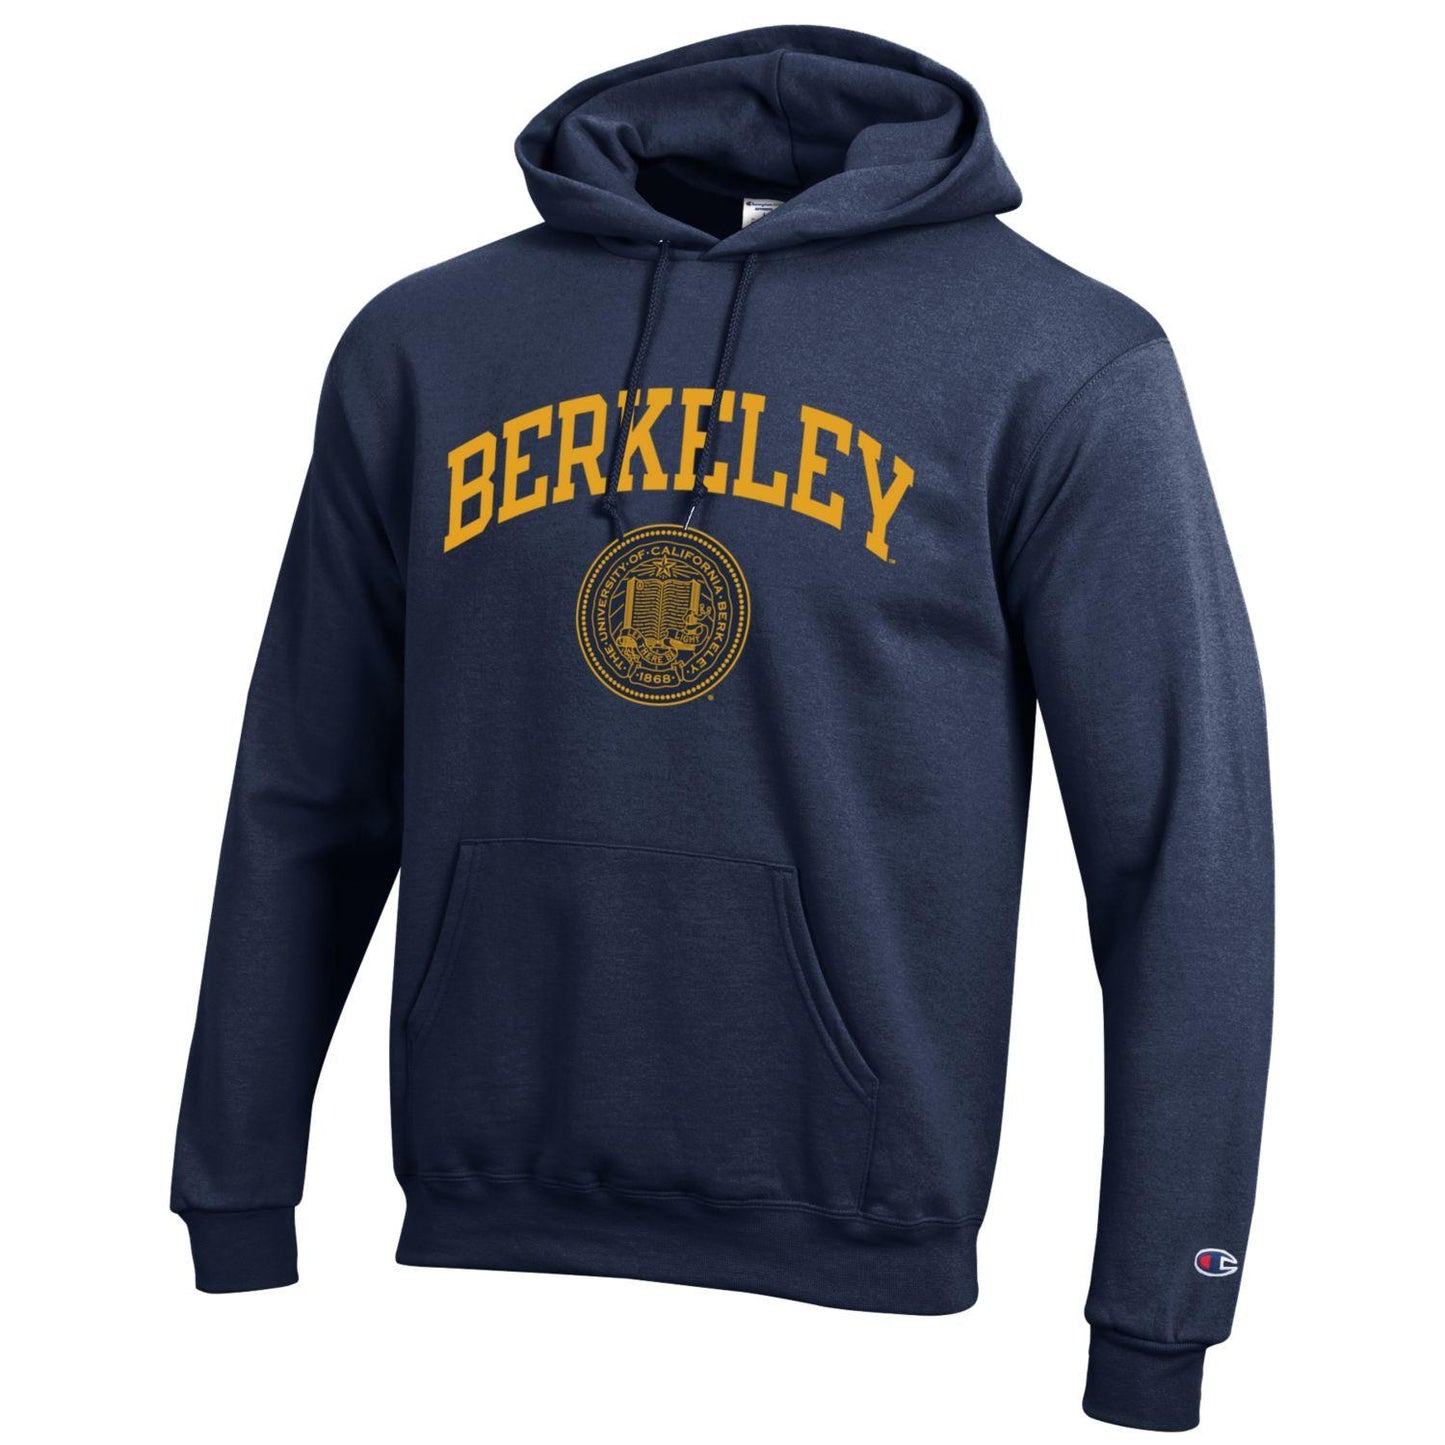 University of California Berkeley arch Champion Sweats Wear seal – and Shop College hoodie